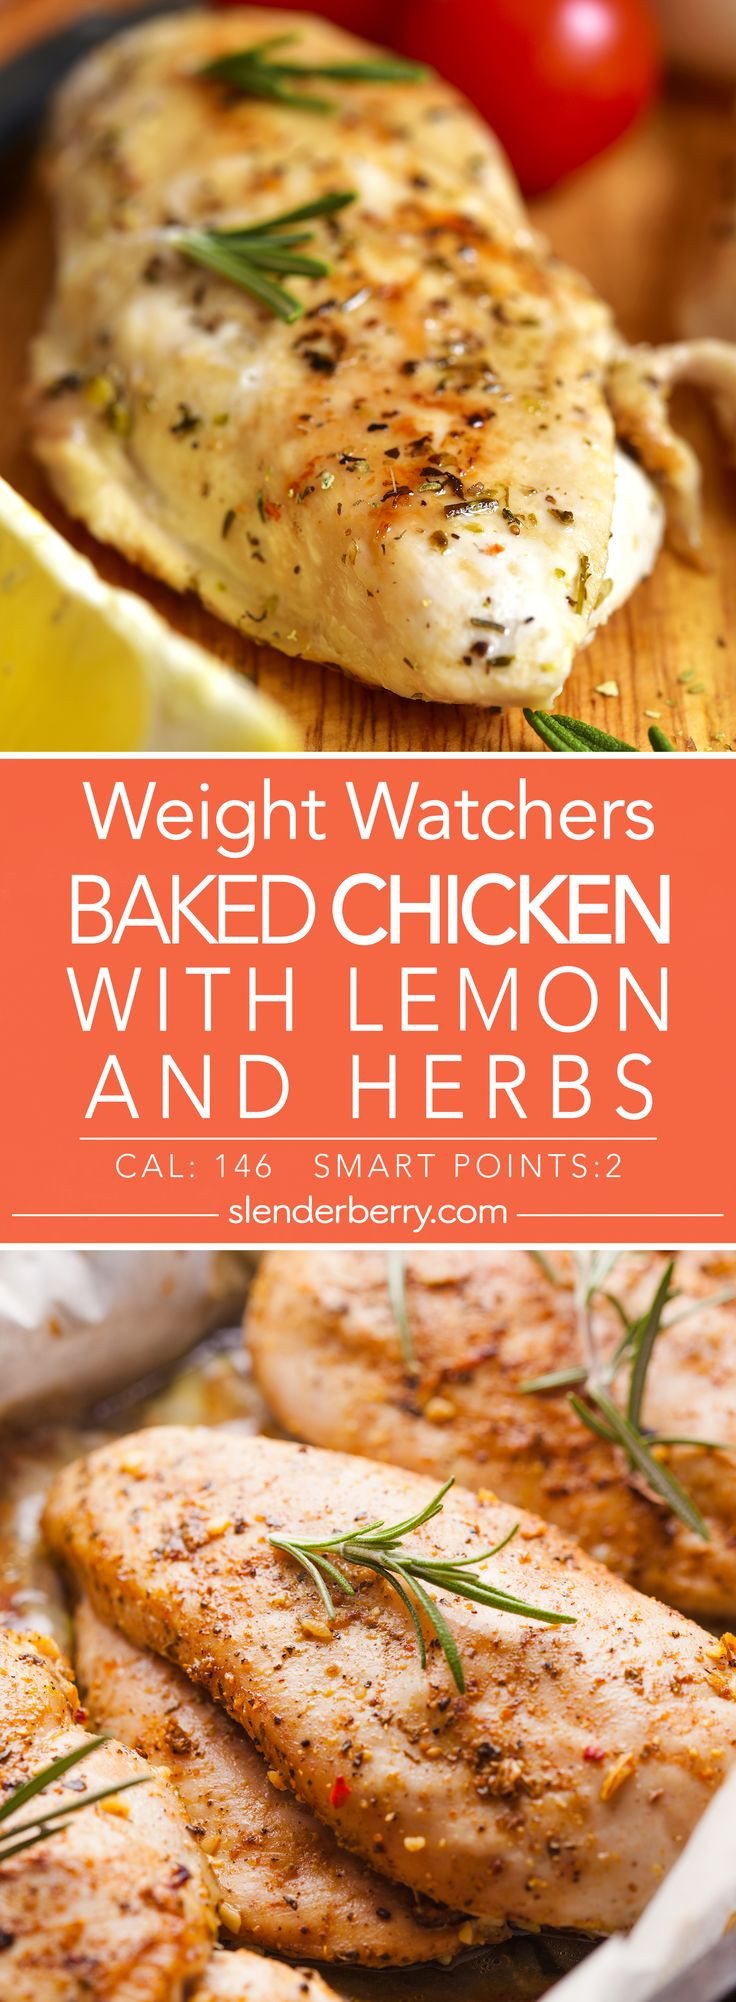 Weight Watcher Baked Chicken Recipes
 best images about Weight Watchers & Healthy Recipes